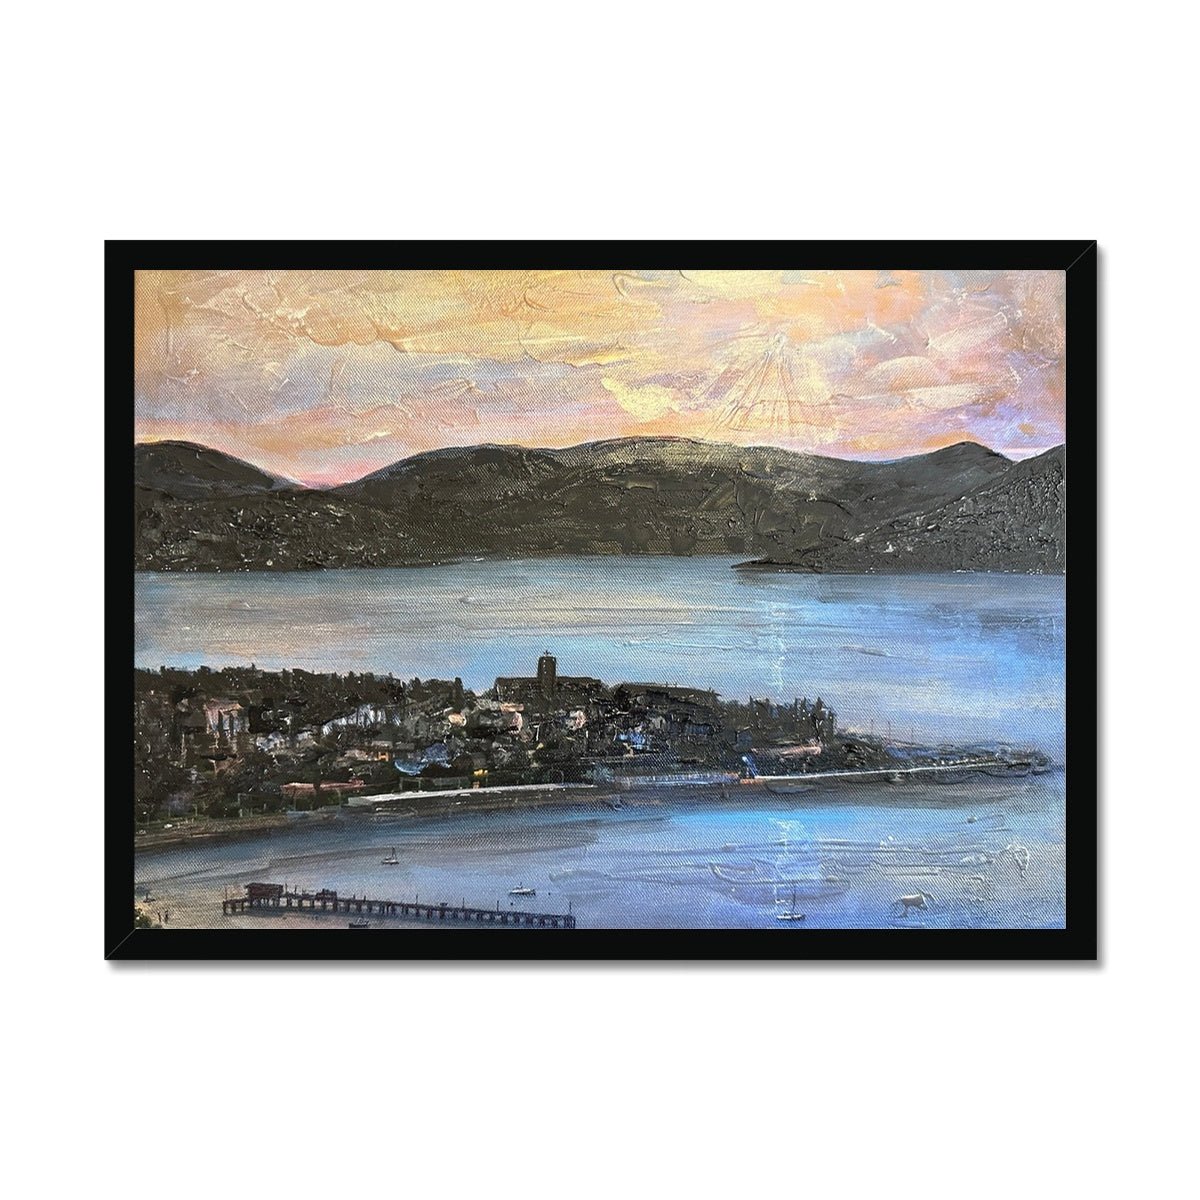 From Lyle Hill Painting | Framed Prints From Scotland-Framed Prints-River Clyde Art Gallery-A2 Landscape-Black Frame-Paintings, Prints, Homeware, Art Gifts From Scotland By Scottish Artist Kevin Hunter